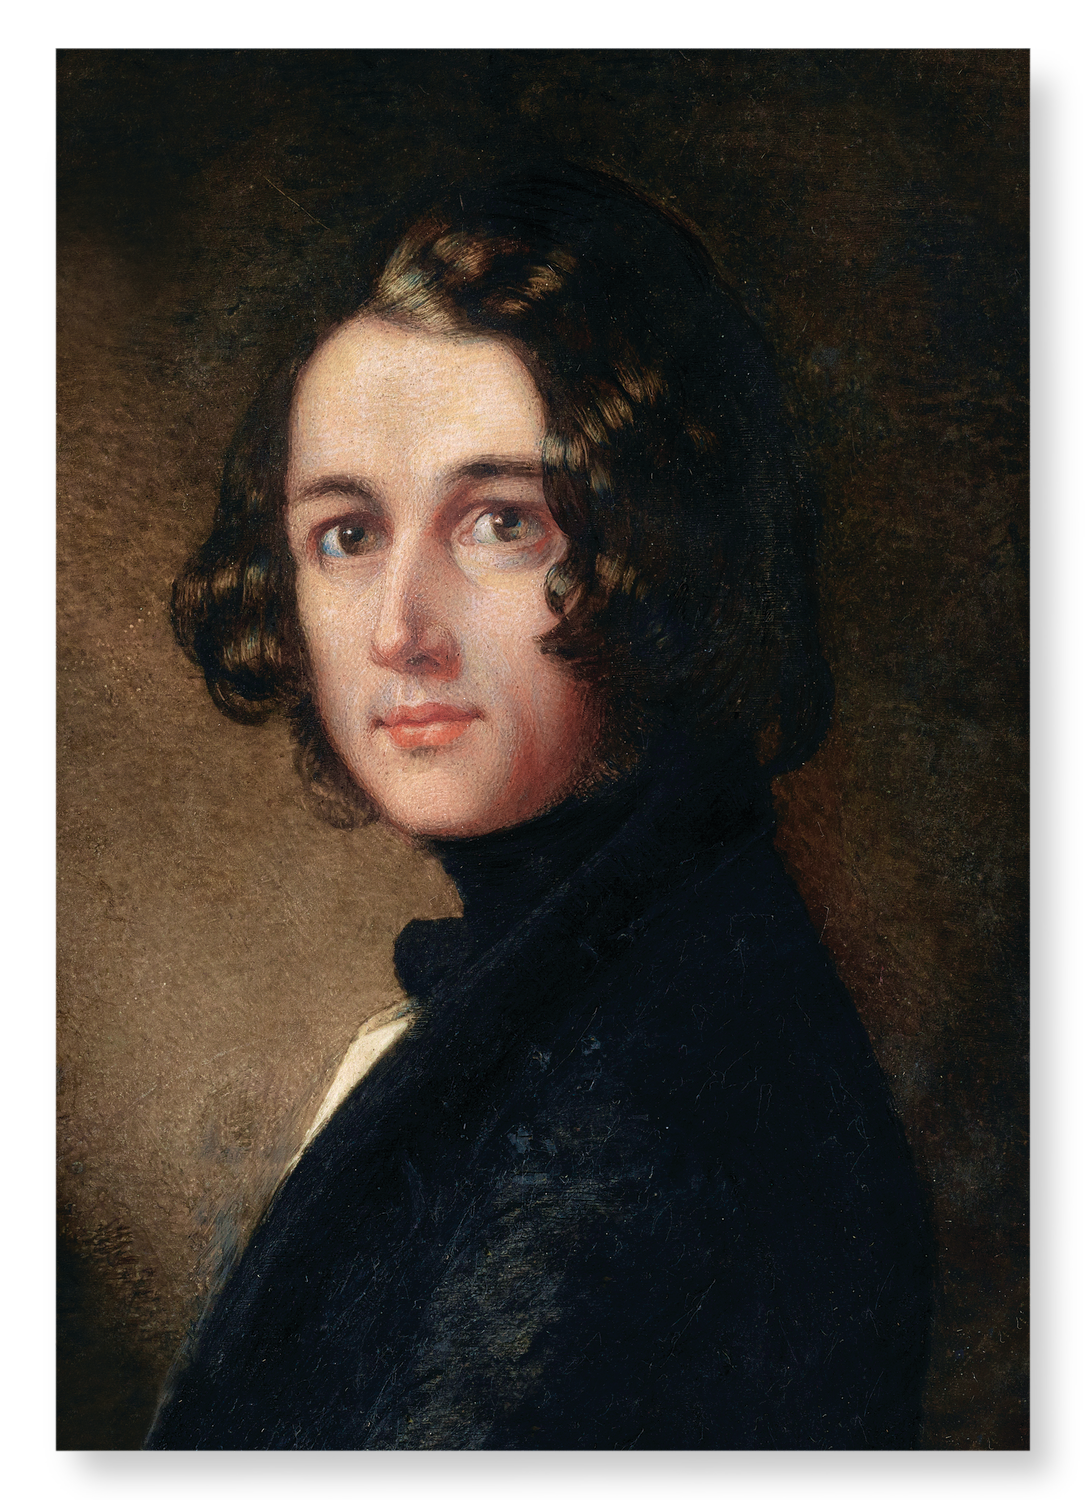 CHARLES DICKENS PORTRAIT BY MARGARET GILLIES (1843)